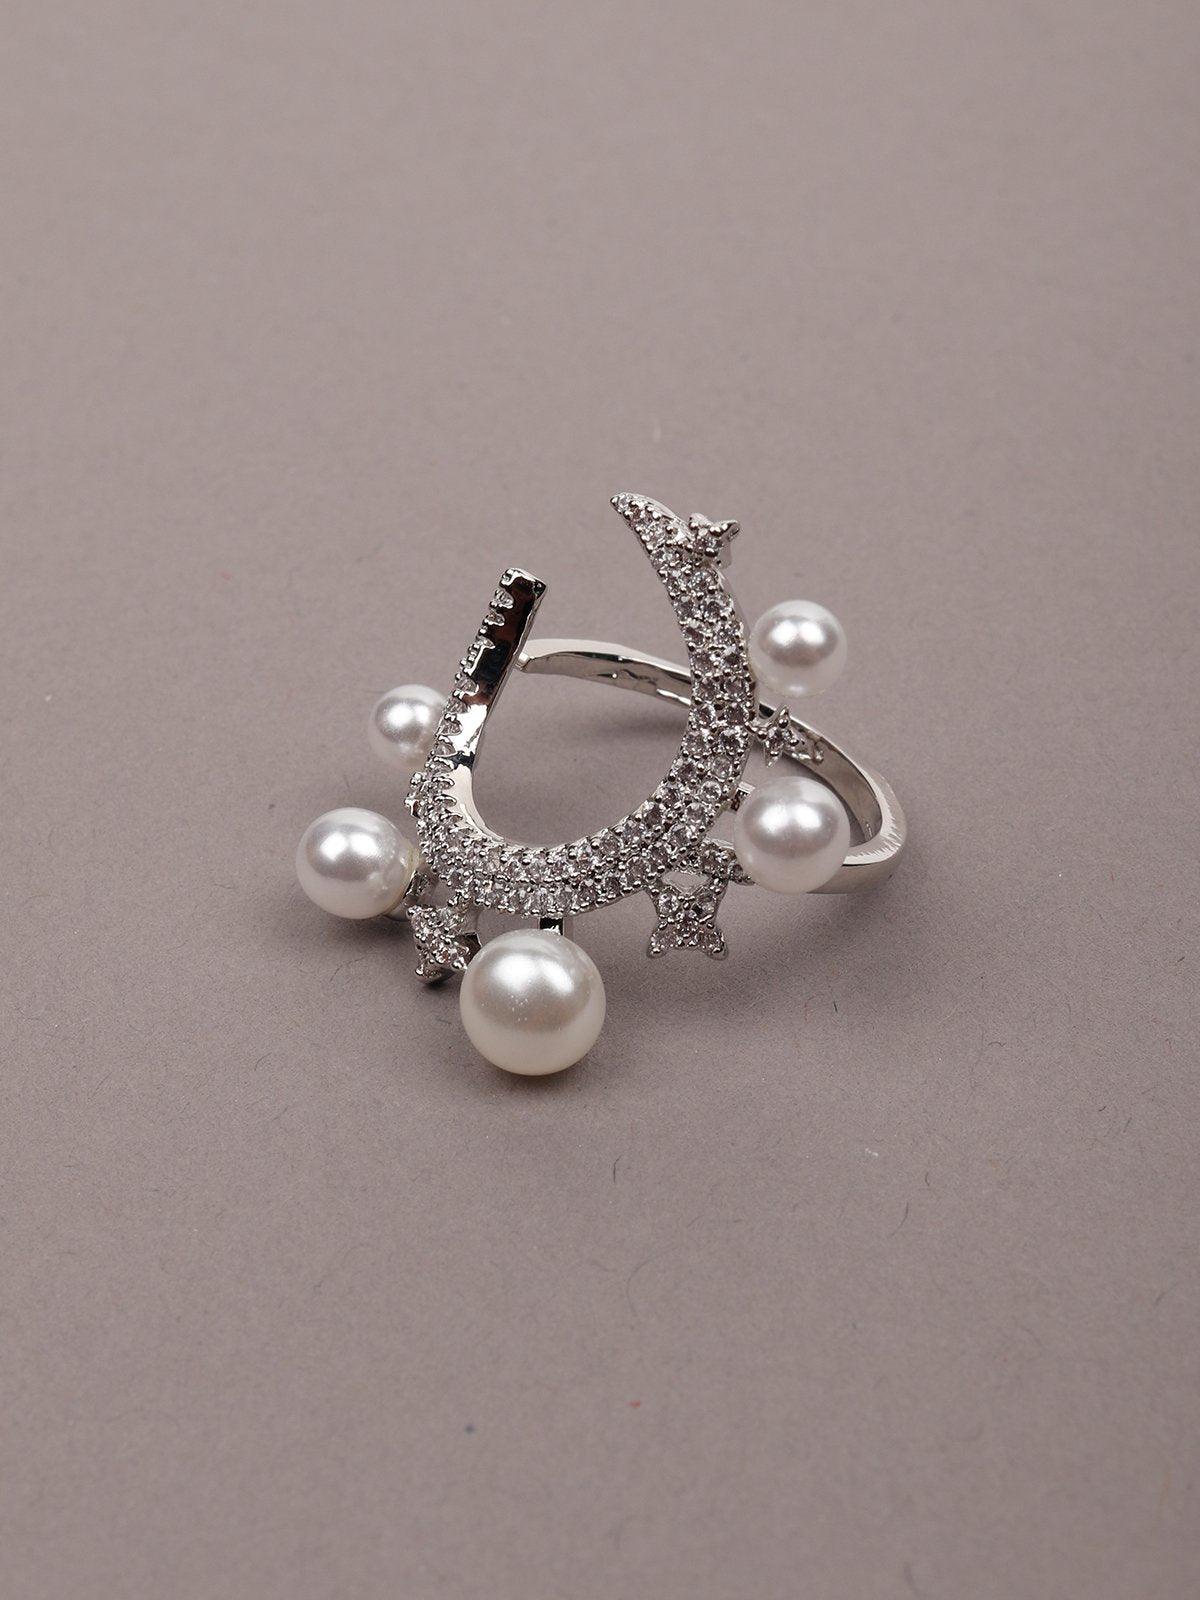 Women's Silver Tone Pearls & Crystal Ring - Odette